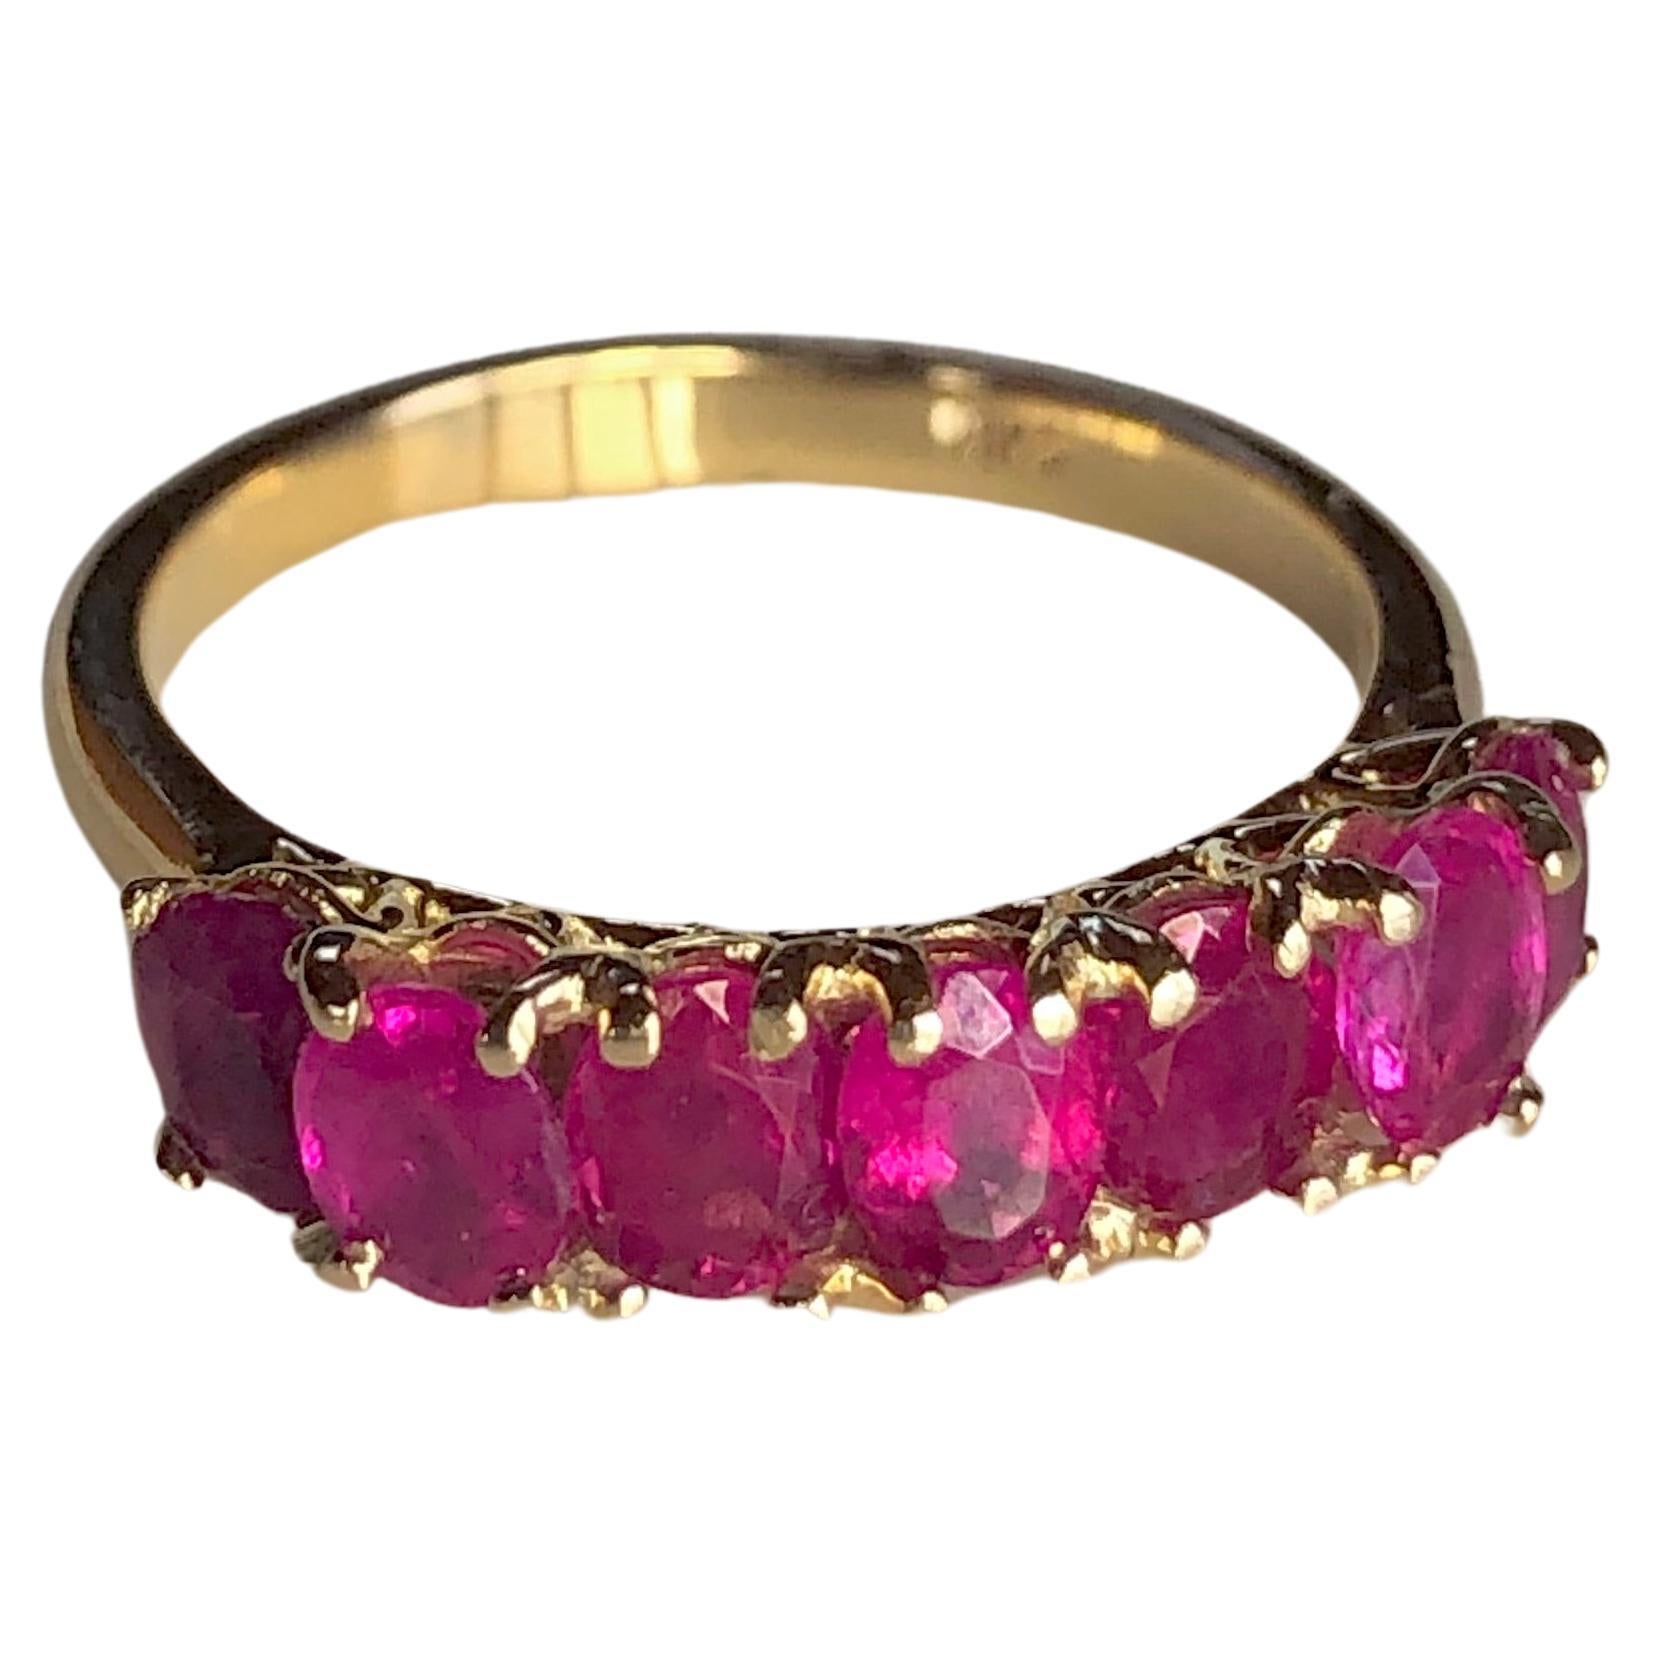 An estate vibrant pinkish red oval-cut natural Burmese ruby seven-stone ring., weighing Approx. 2.30 carats, set in a very classic seven-stone 18K yellow gold mounting. The oval-cut rubies are full of color and brilliance. Stunning.  
Condition: